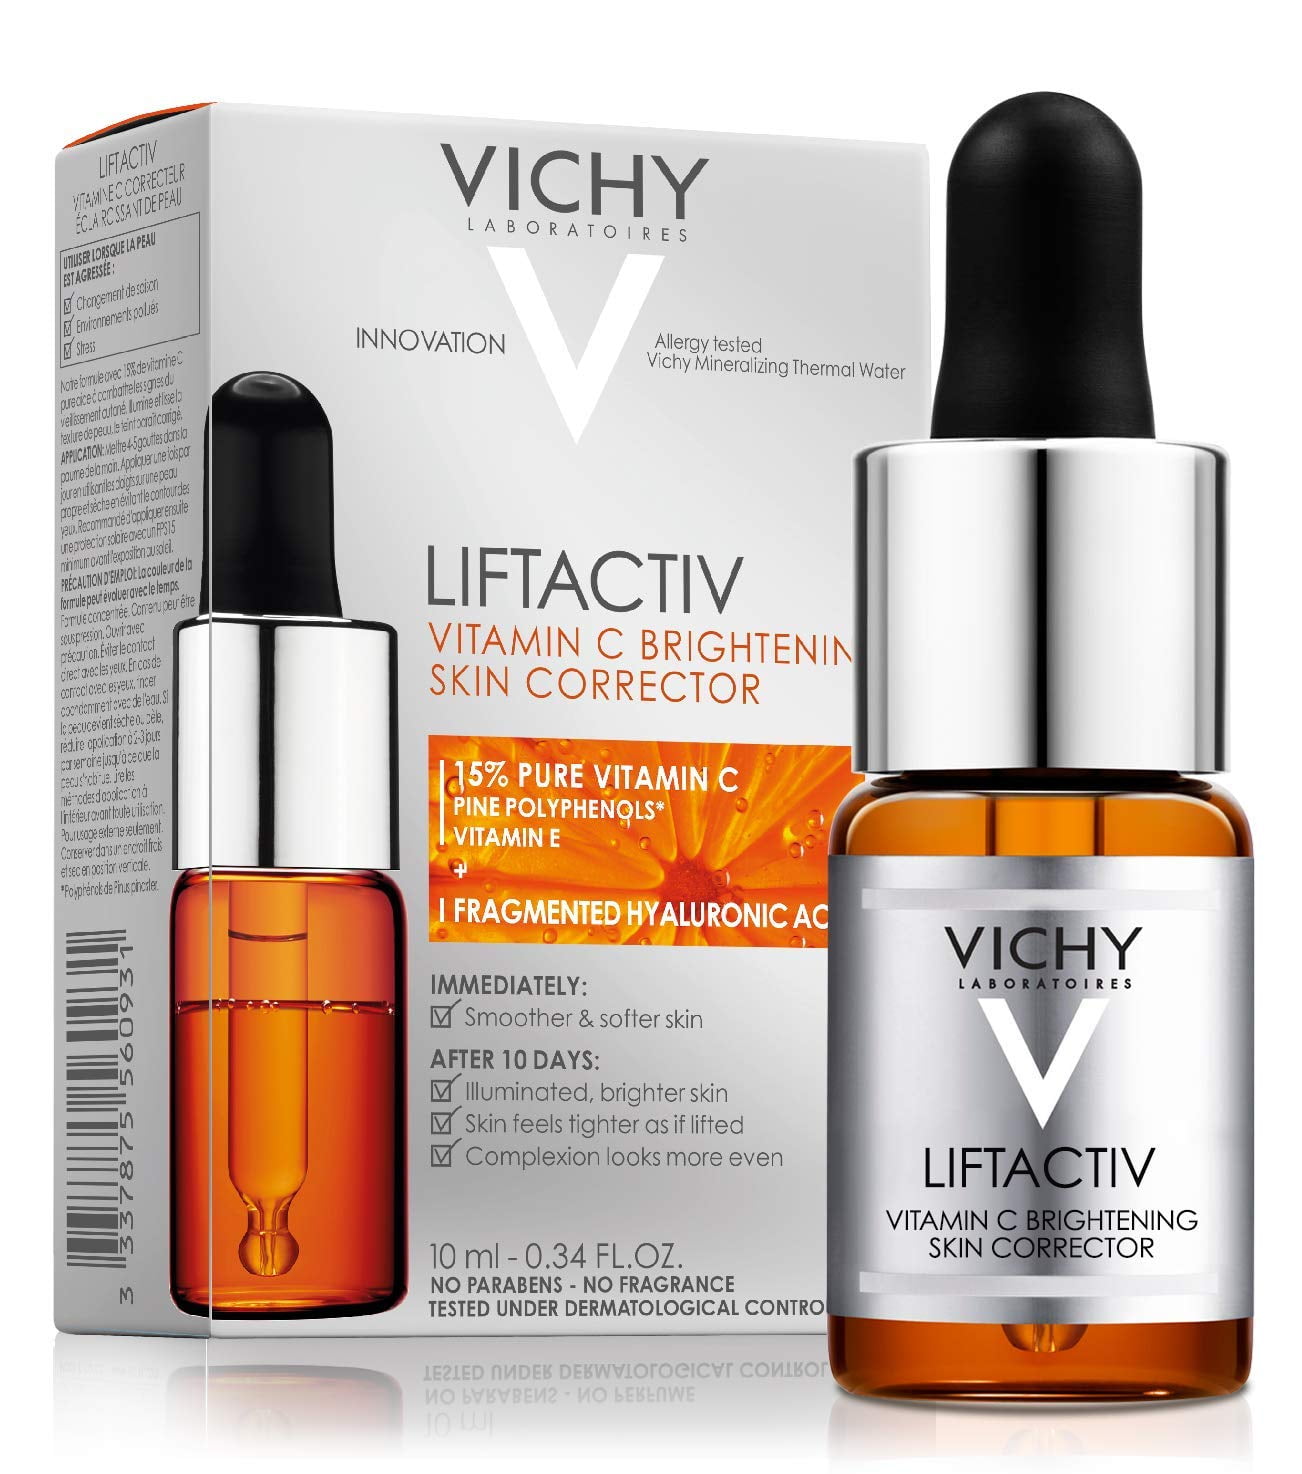 Vichy LiftActiv Vitamin C Serum and Brightening Skin Corrector, Anti Aging Serum for Face with 15% Pure Vitamin C, Hyaluronic and Vitamin E, for Brighter, Firmer Skin - Walmart.com